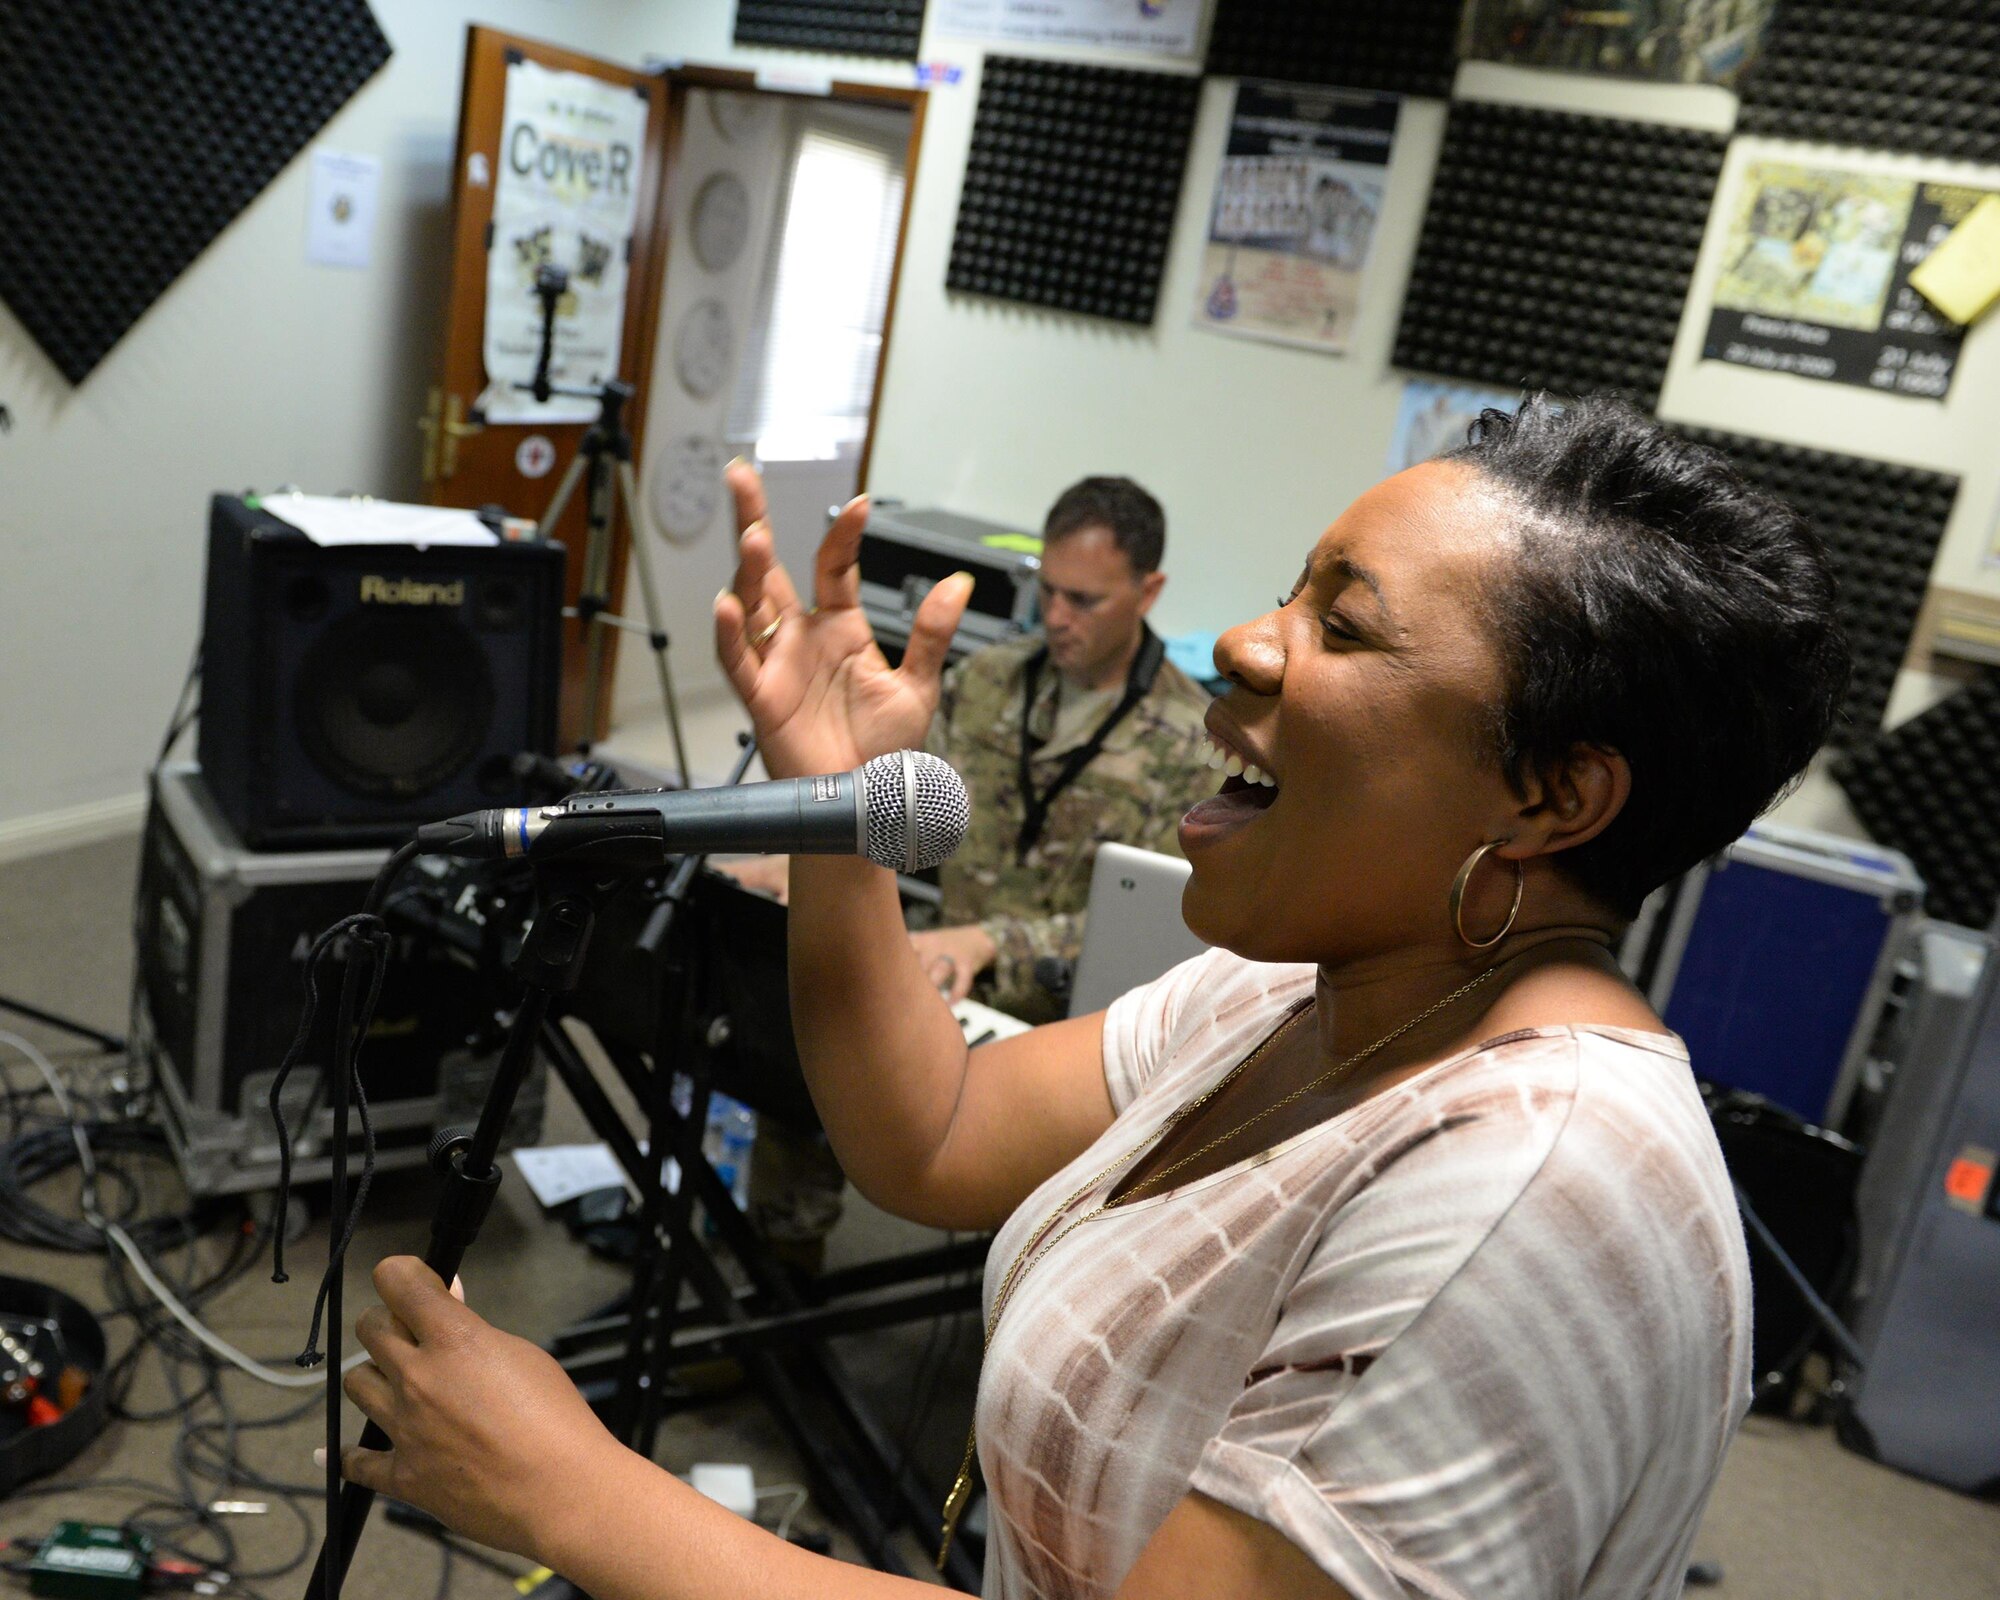 Melinda Doolittle, an accomplished vocalist and top finisher on American Idol, sings with the Air Forces Central Command Band in preparation for a concert at Al Udeid Air Base, Qatar, May 25, 2017. Doolittle performed for service members deployed overseas, accompanied by the Air Forces Central Command Band. (U.S. Air Force photo by Tech. Sgt. Bradly A. Schneider/Released)